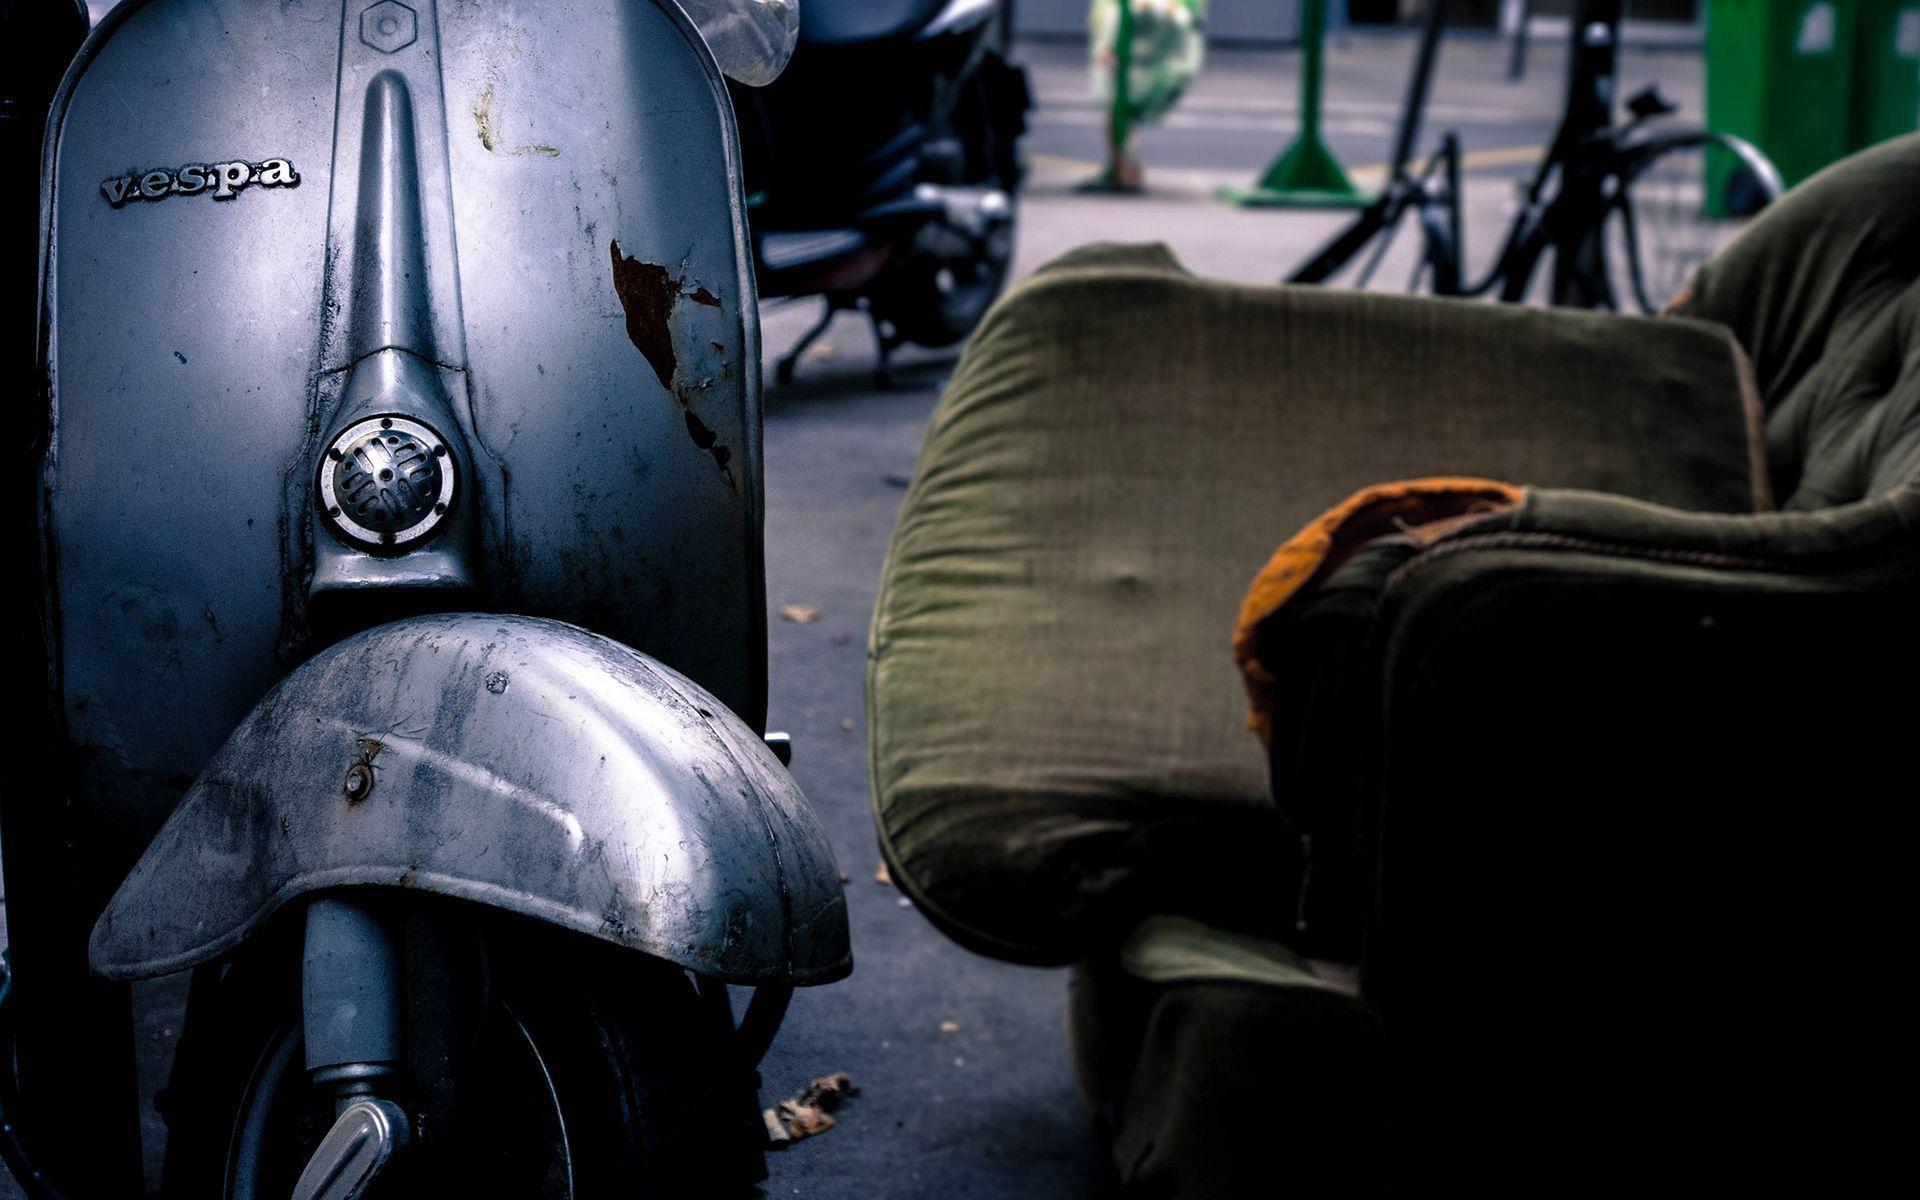 Old Vespa Scooter Exclusive HD Wallpaper #